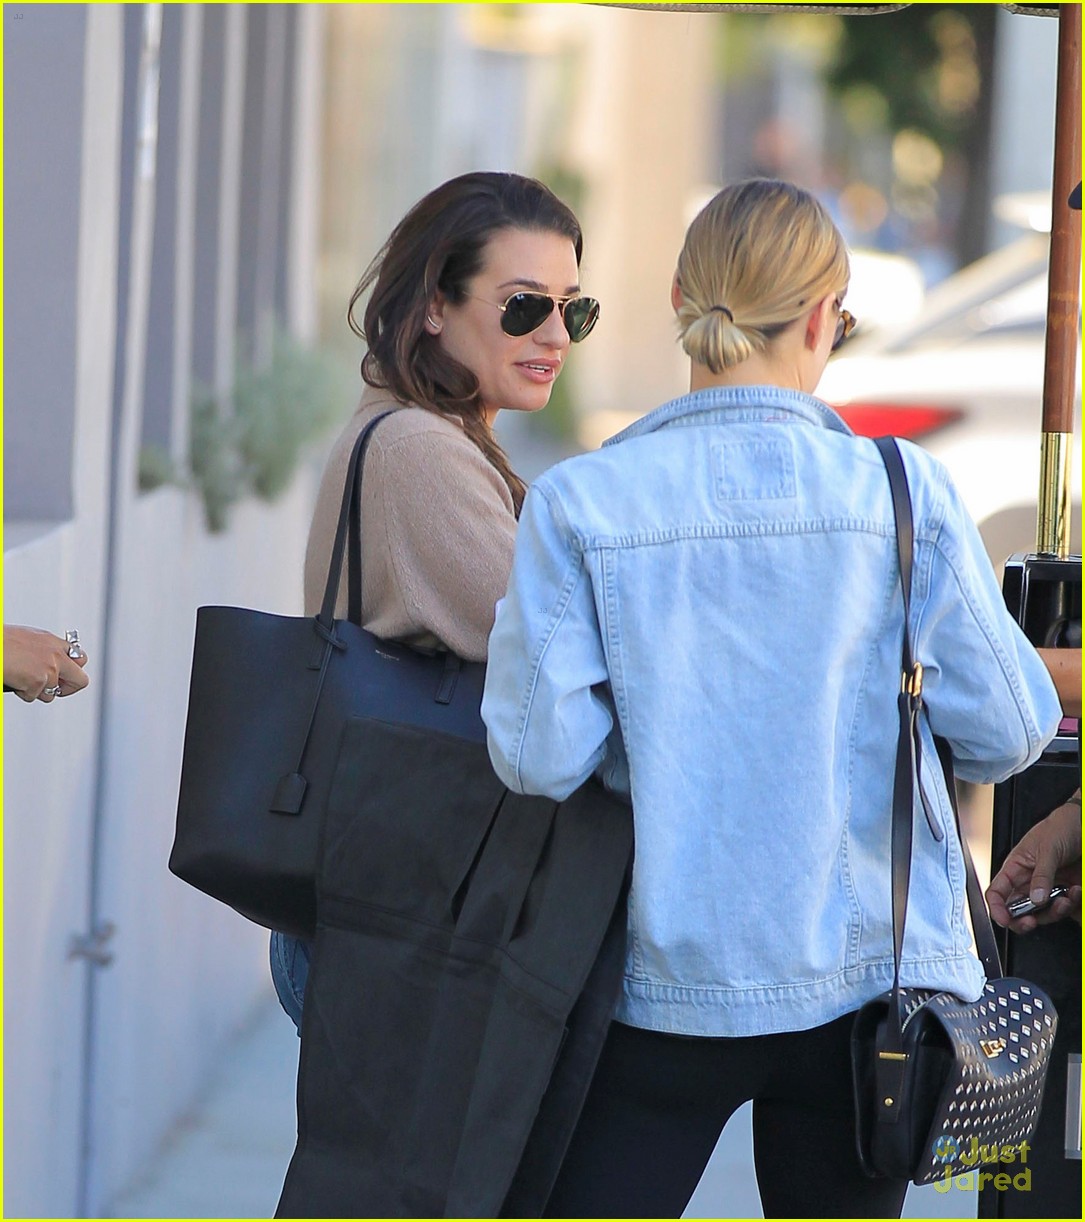 Lea Michele & Jenna Ushkowitz Run Separate Errands After Reunion in NYC ...